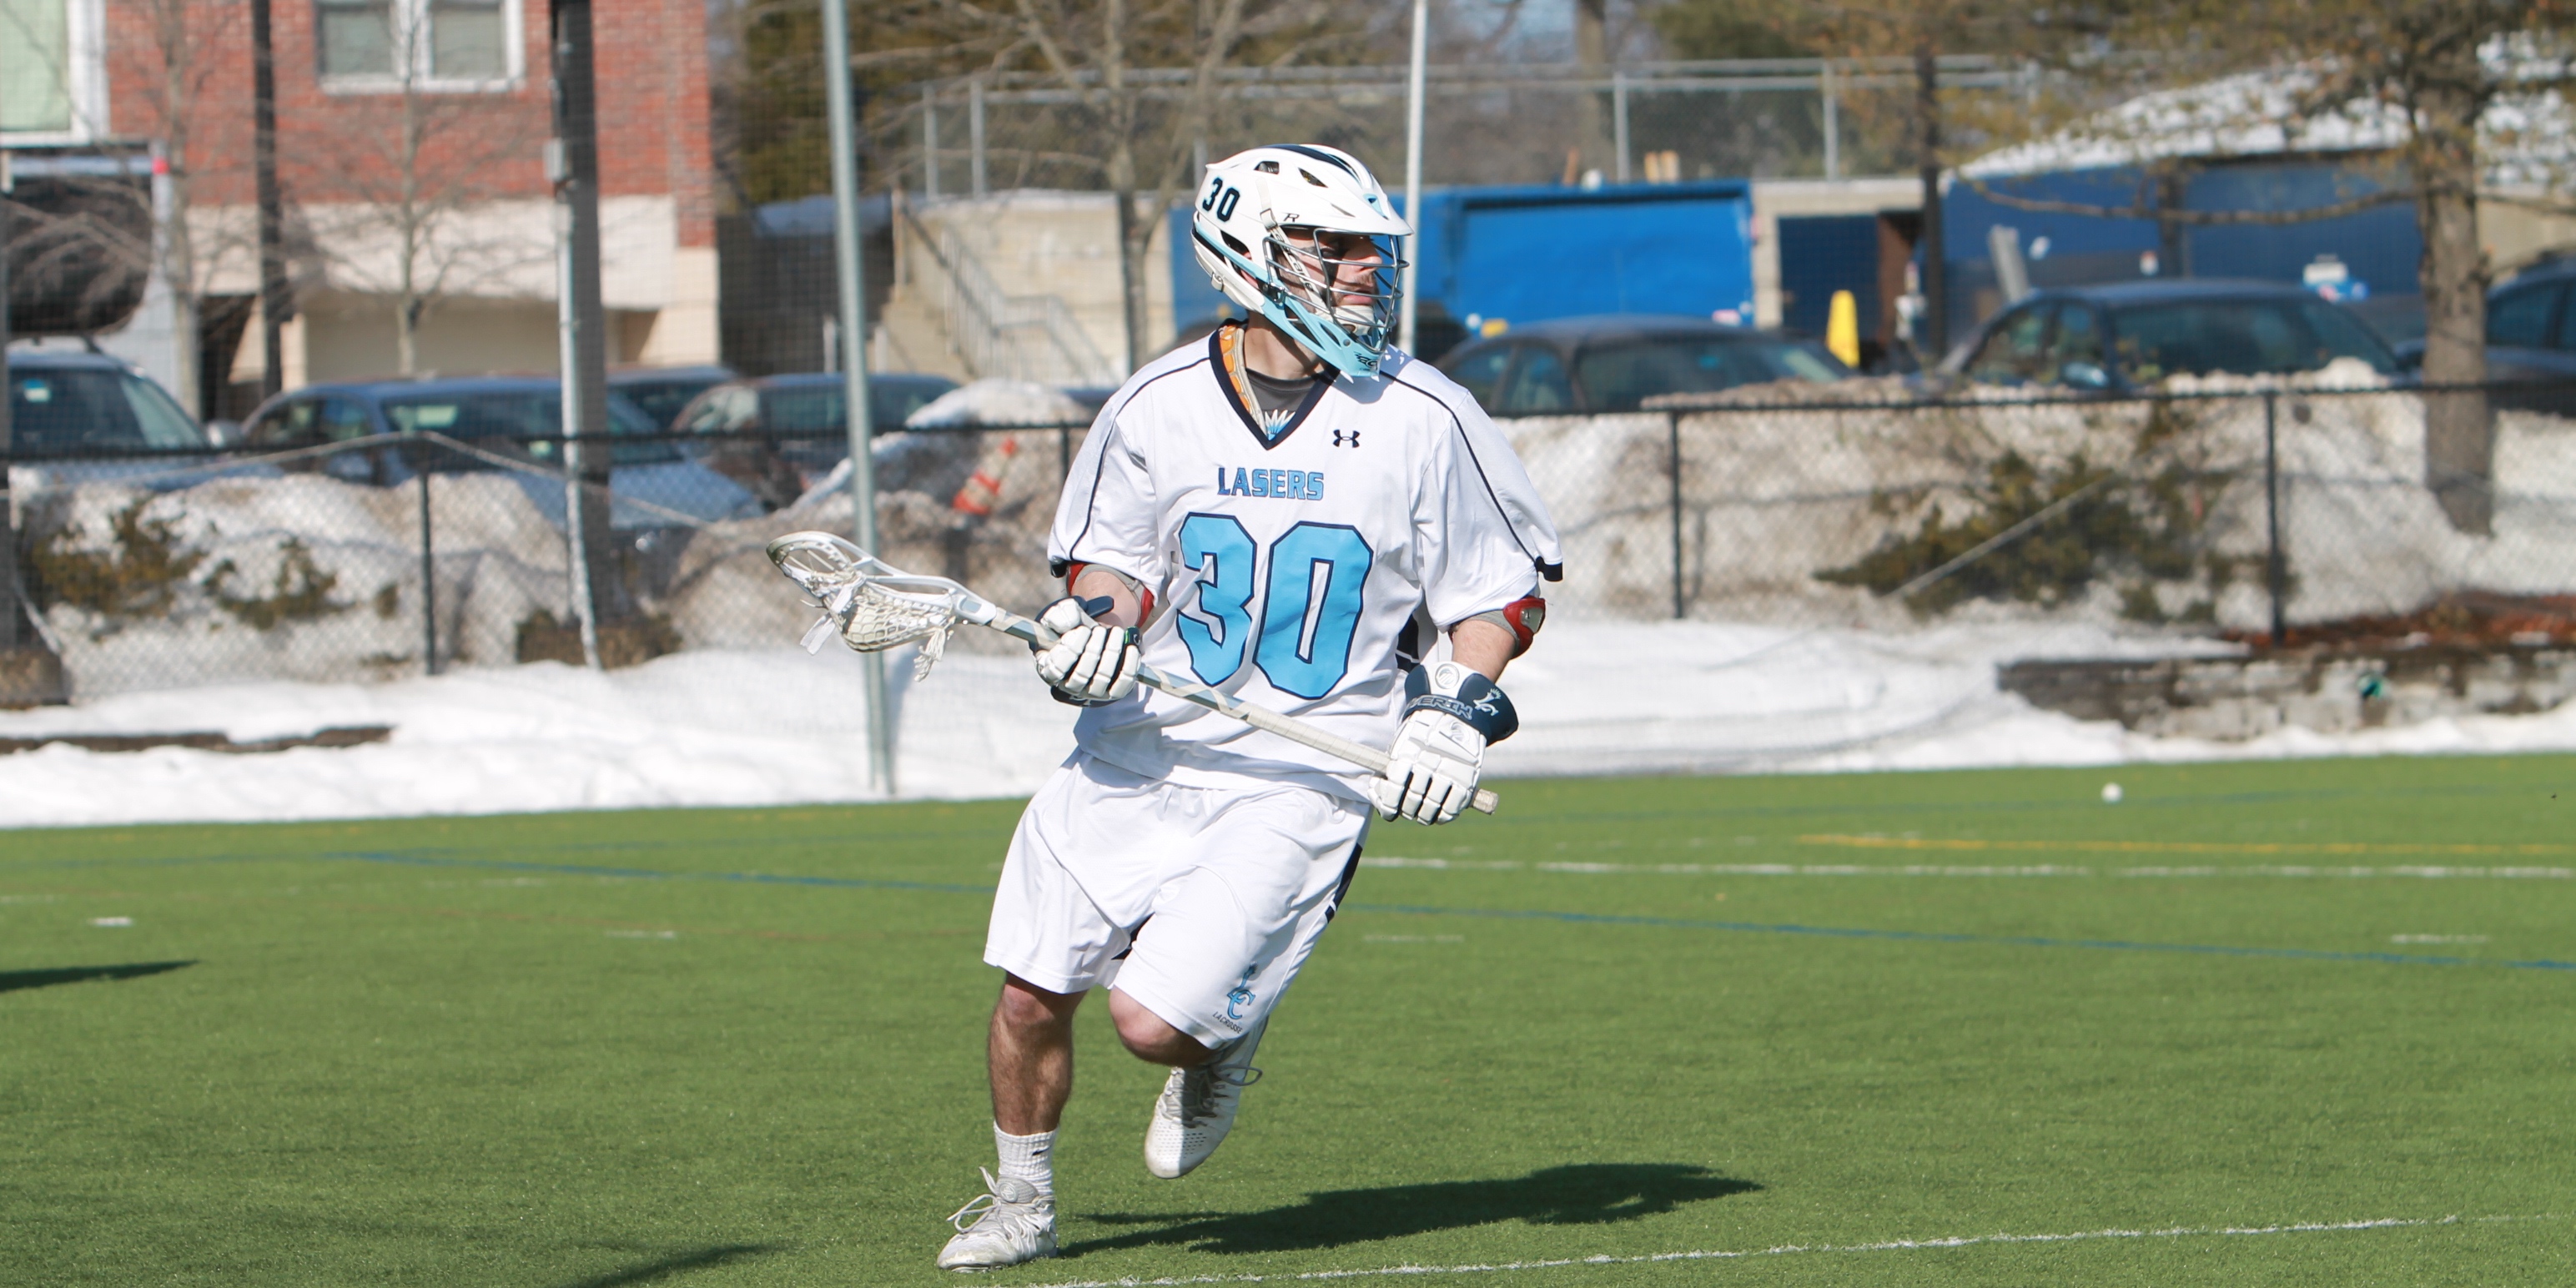 Men's Lacrosse Defeats Centenary, 21-1, in First Game of Texas Trip